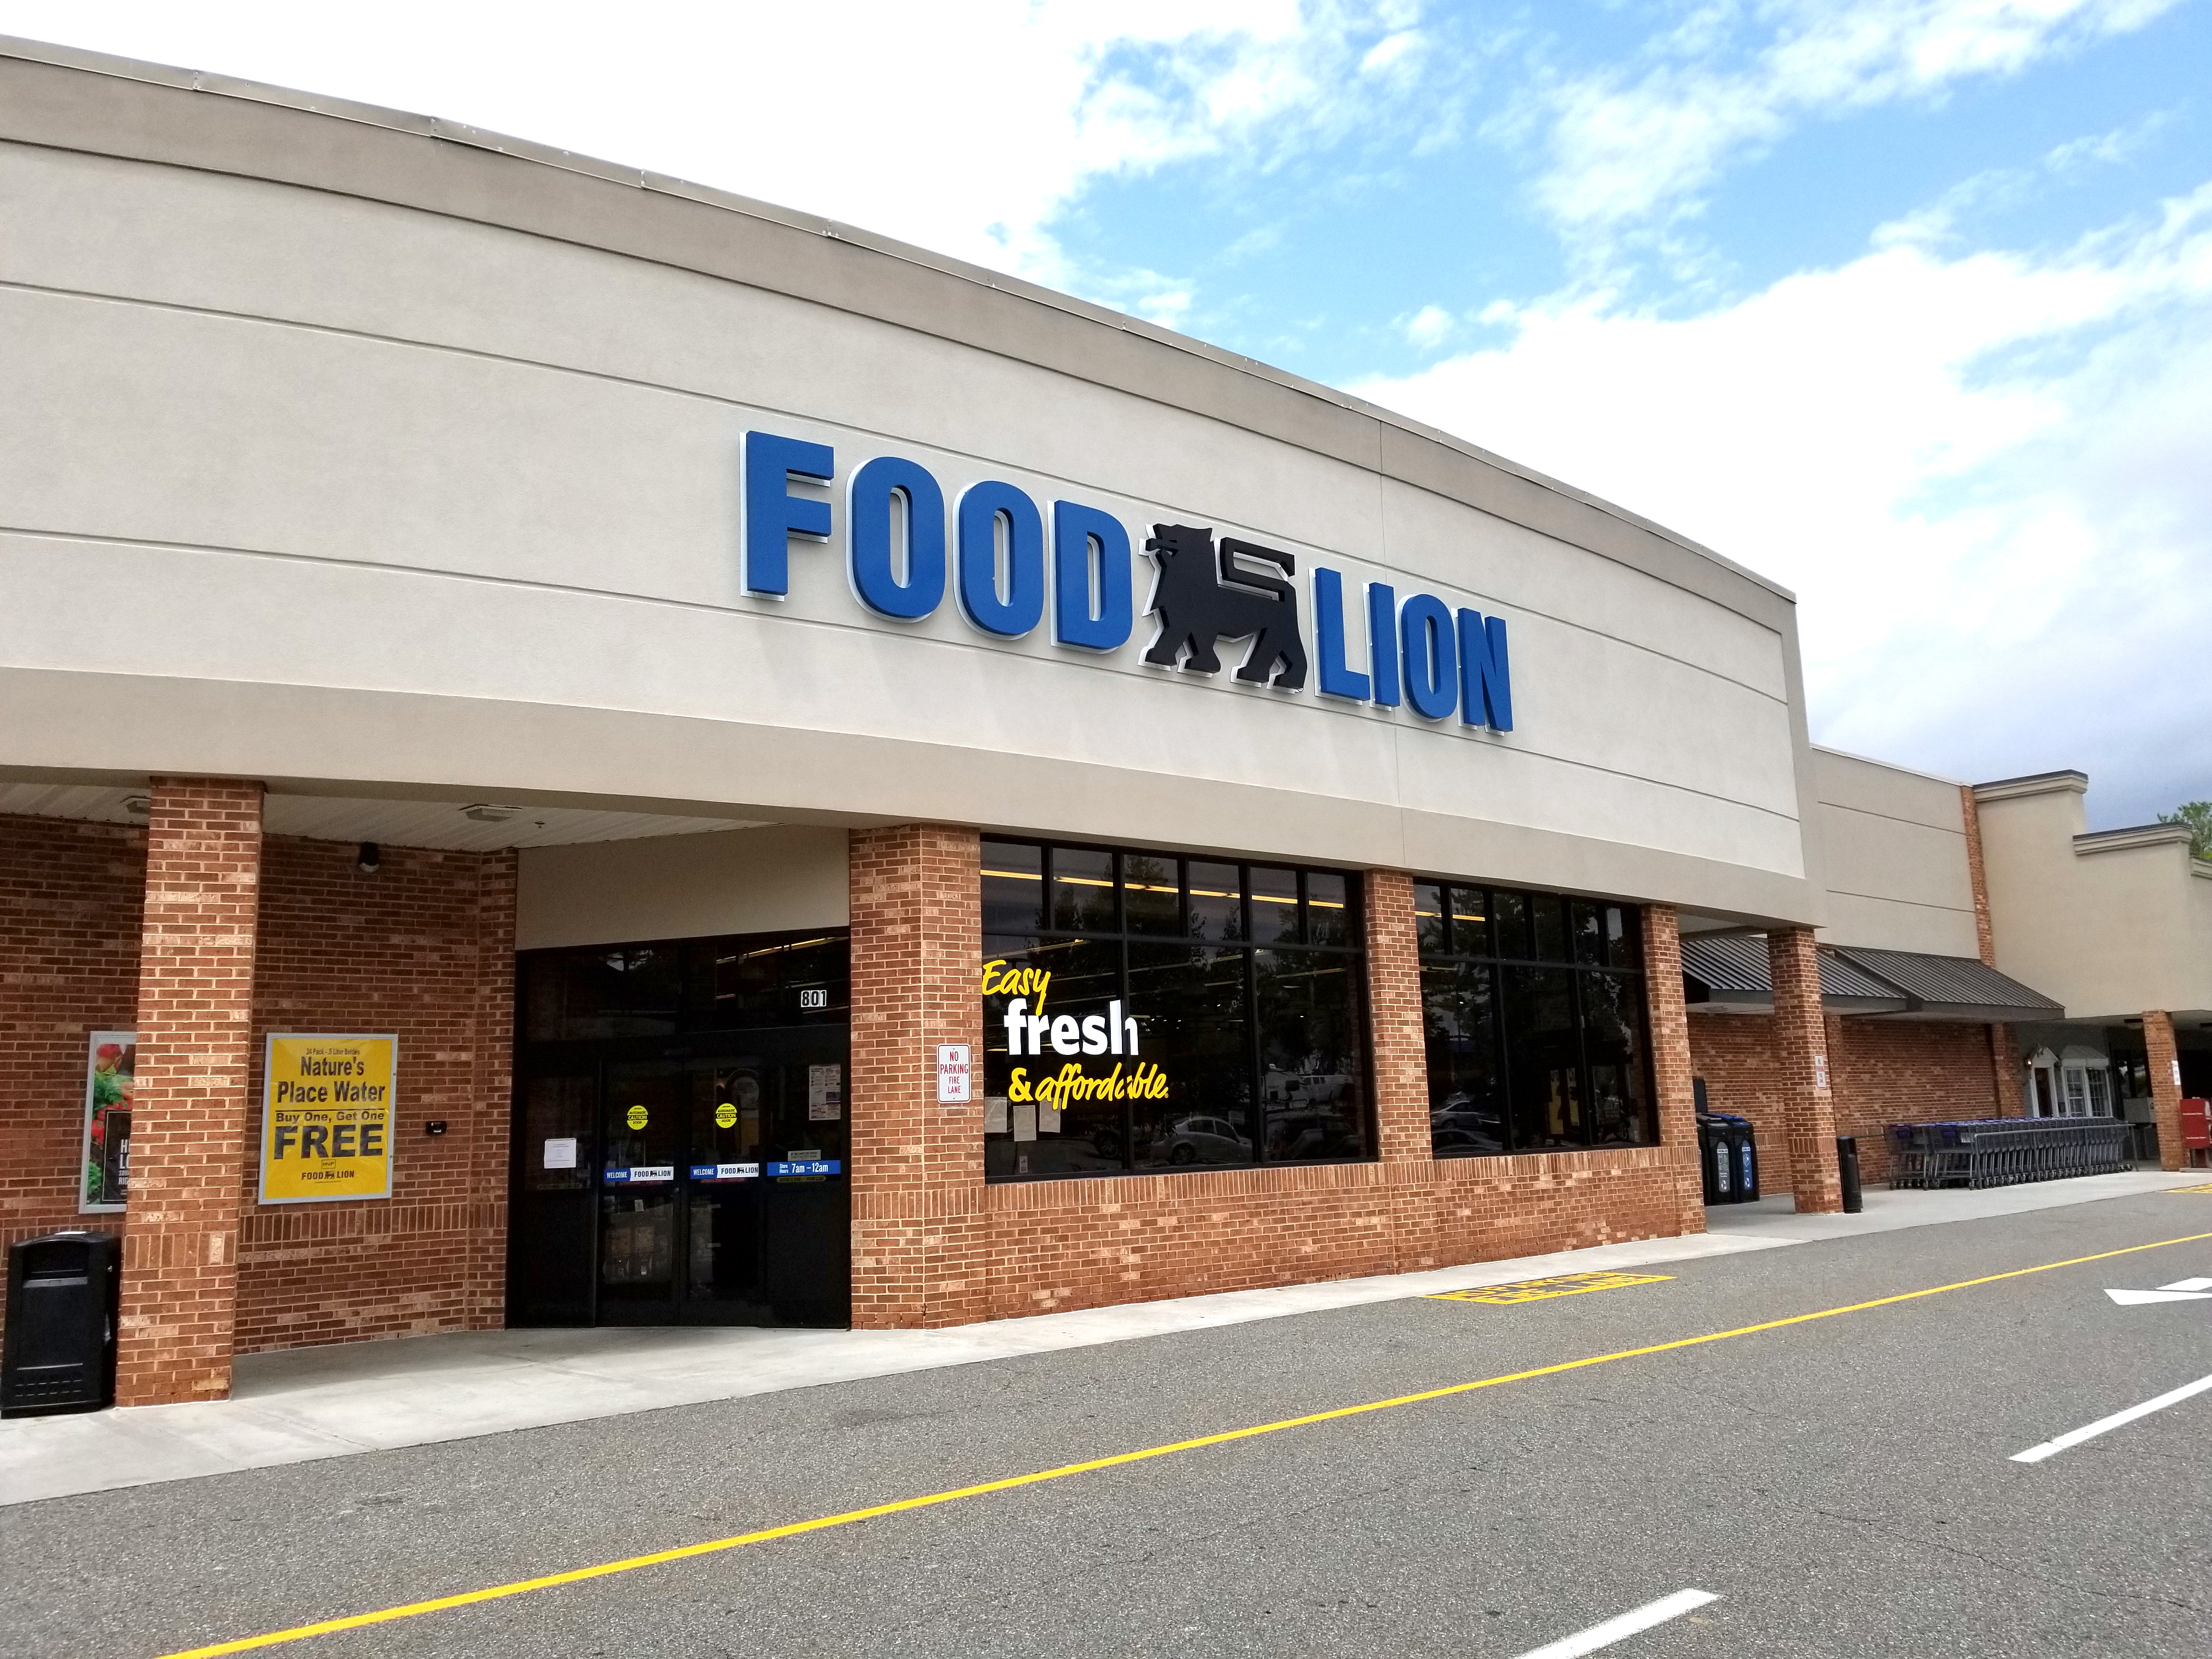 Food Lion Announces Commitment To Sustainable Chemistry Transparent Products And Packaging Food Lion Llc [ 3024 x 4032 Pixel ]